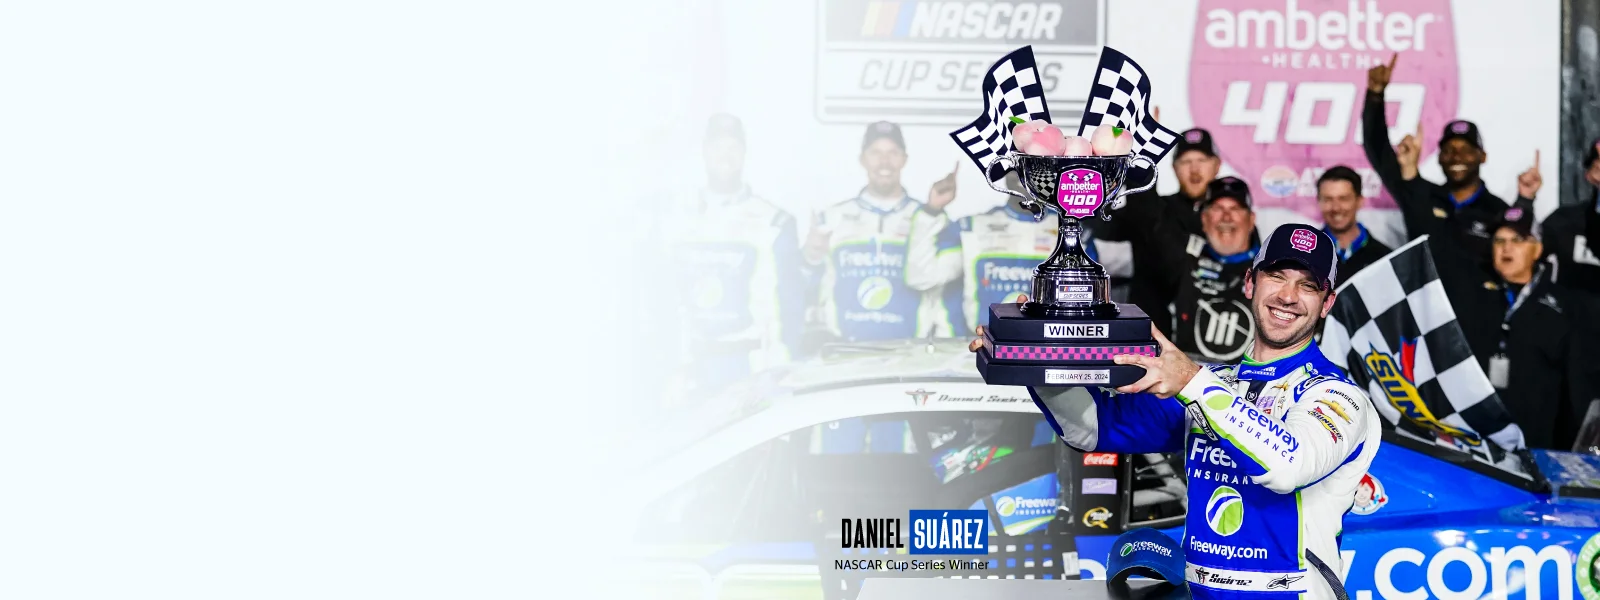 Daniel Suárez proudly wearing the Freeway Insurance uniform and raising the checkered flag after winning his second Nascar Cup Series.